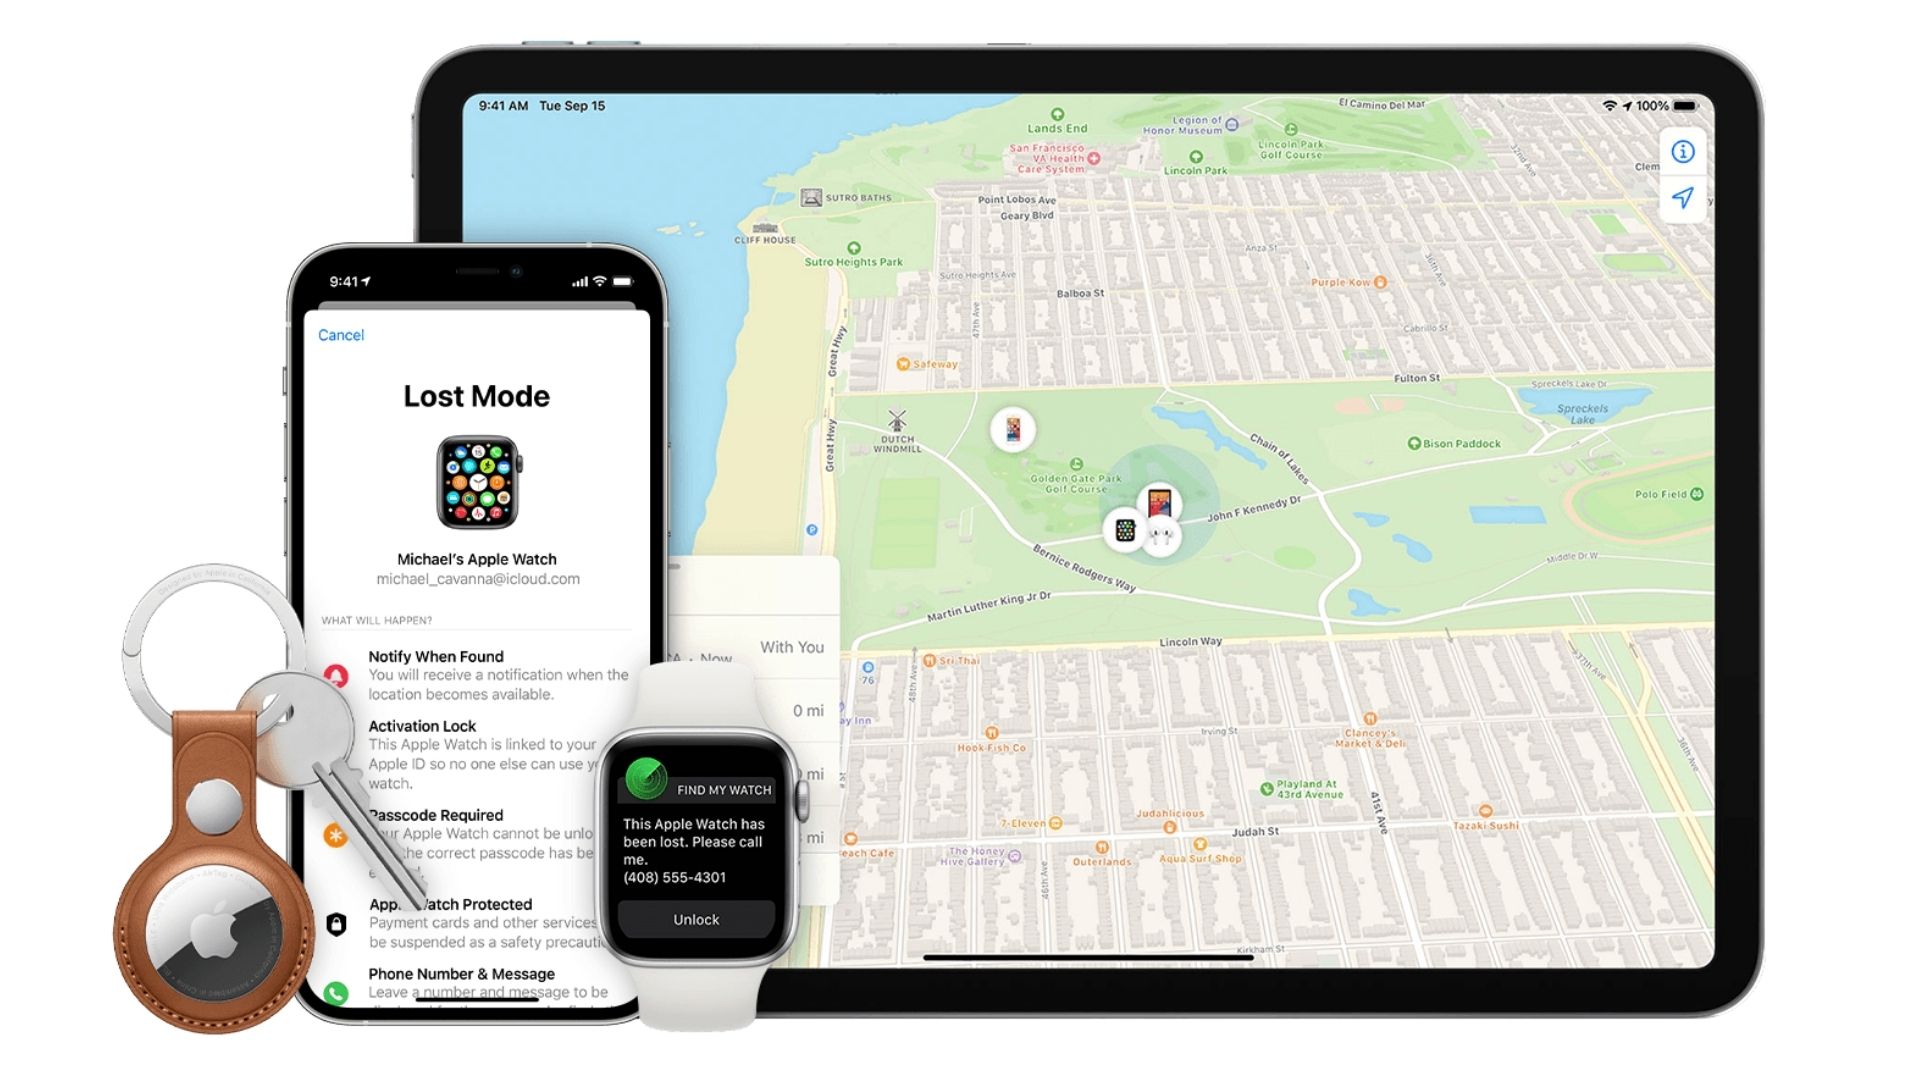 How to find your missing iPhone, iPad, Mac, or AirTag using the Find My app on your friend's iPhone